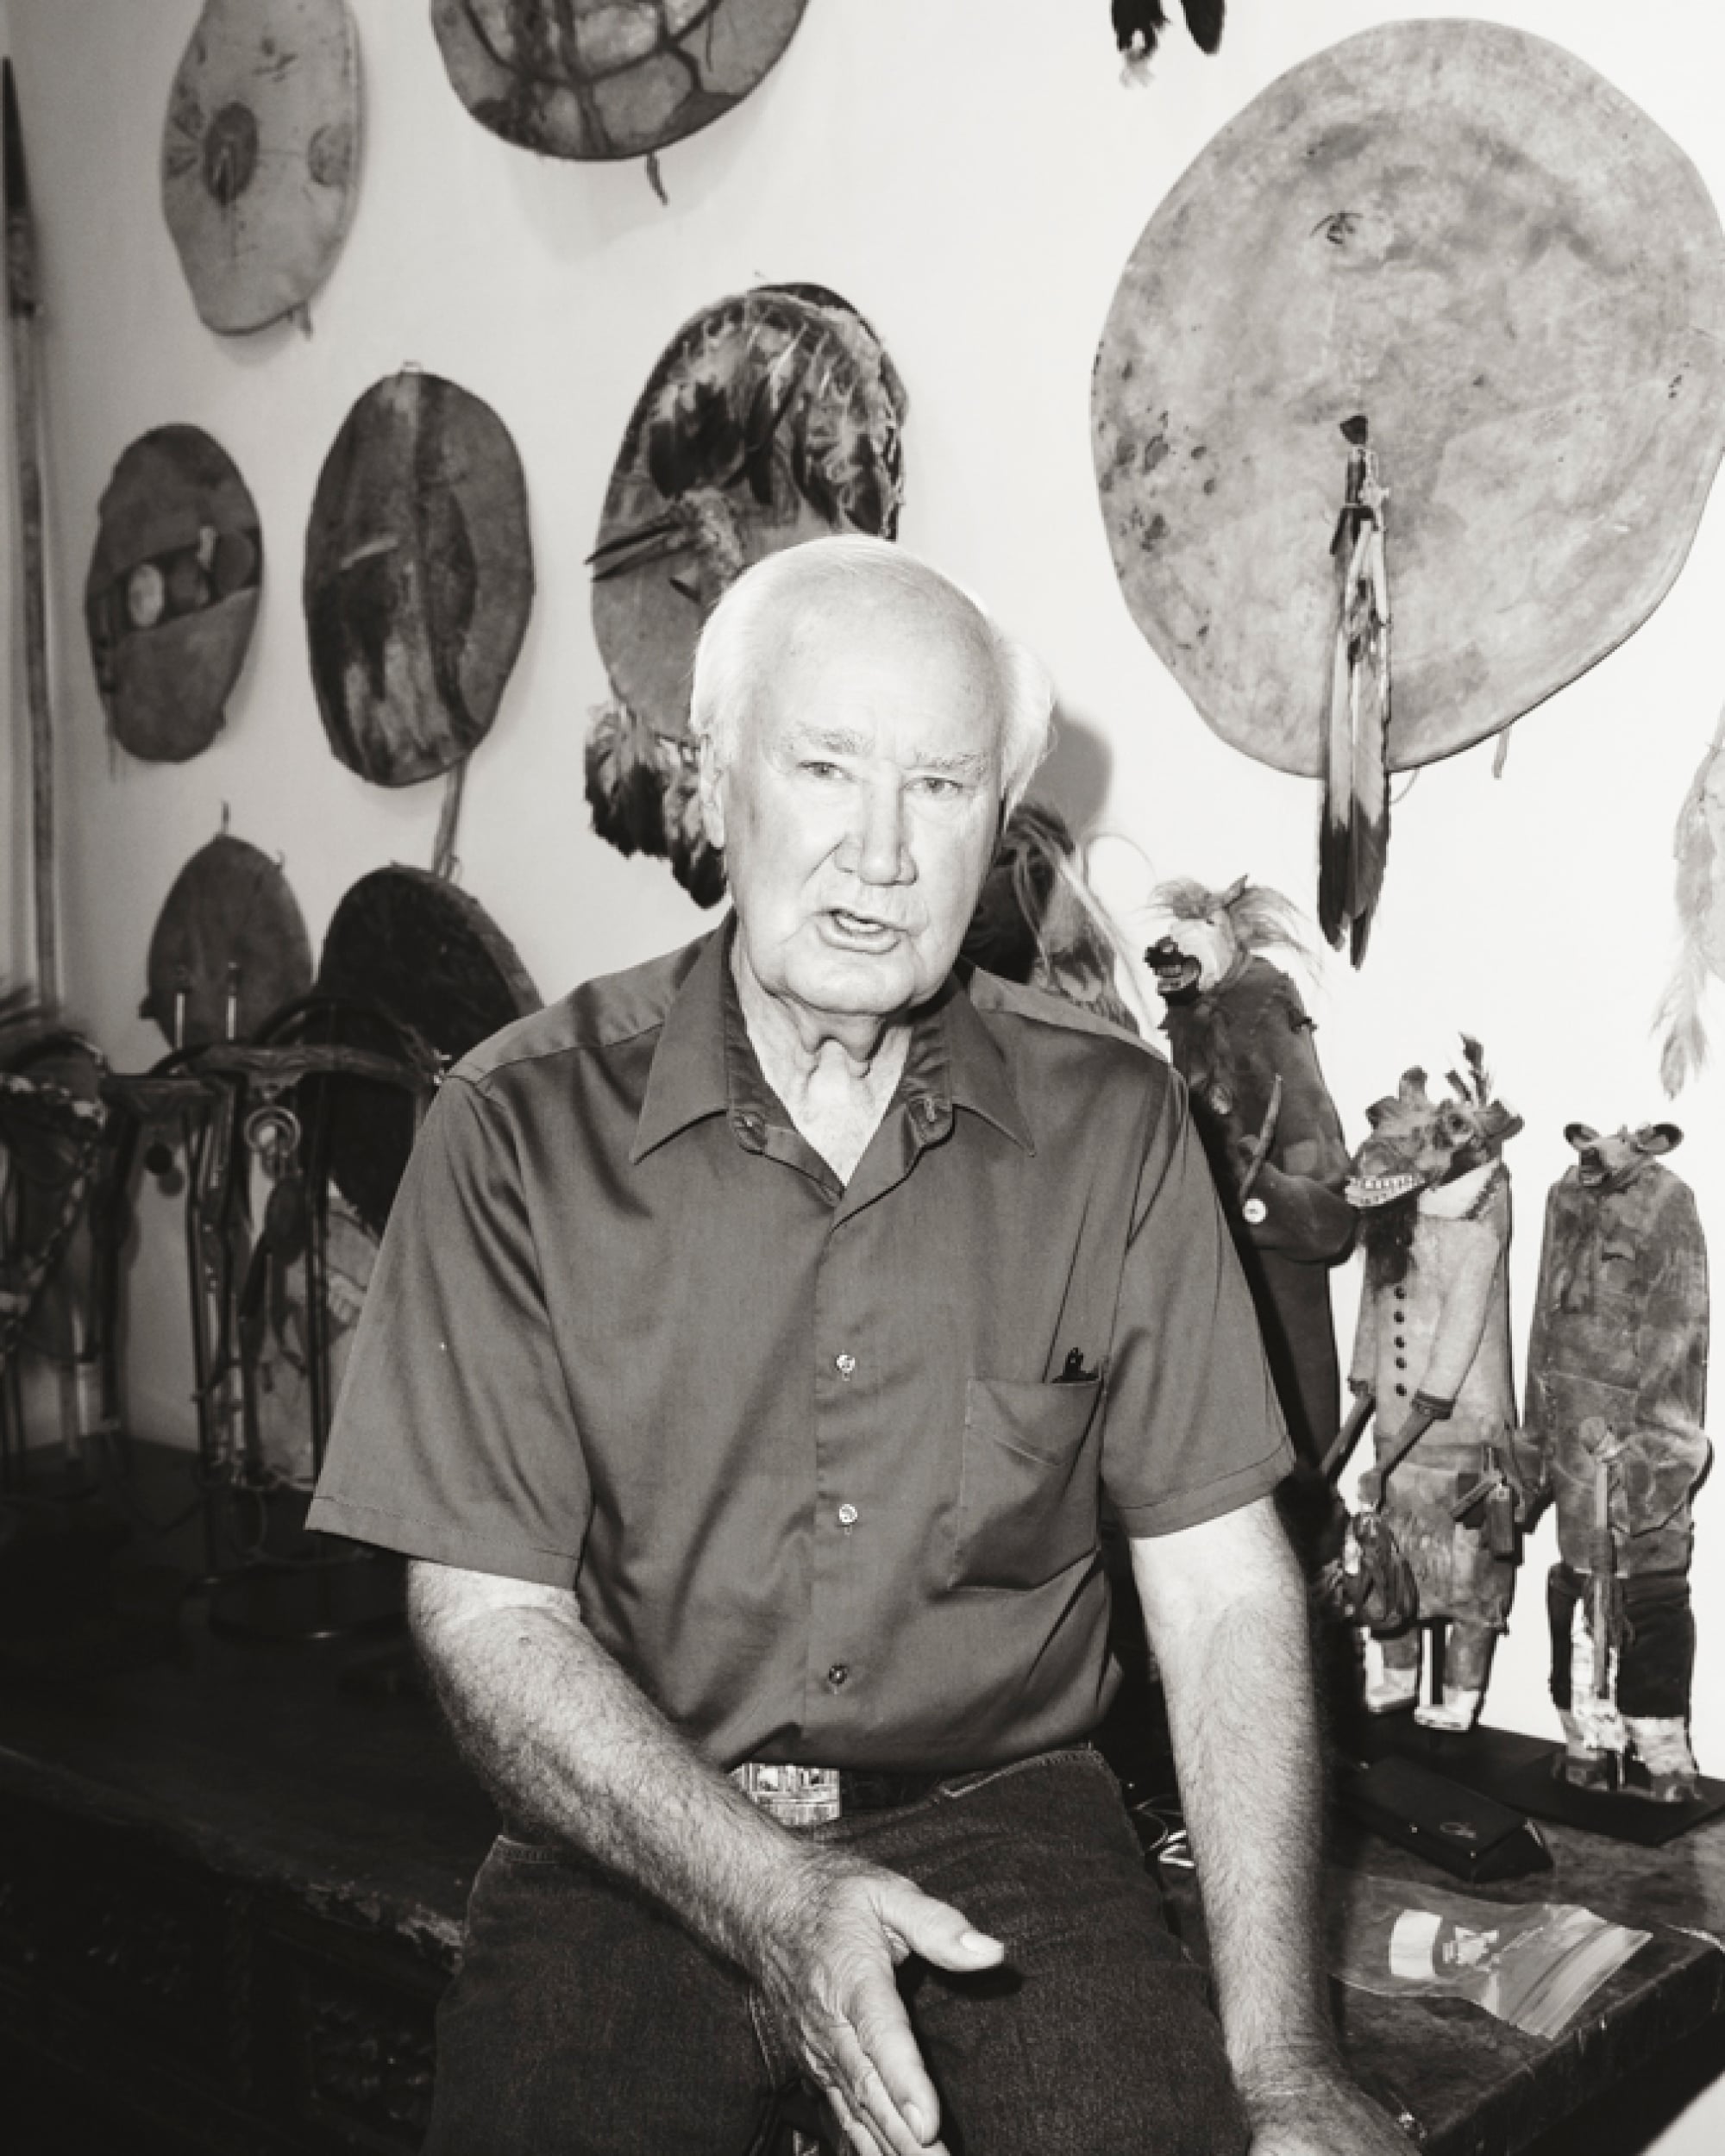 “I dare you to go get it. If you can find it, you can have it.” – Forest Fenn on those looking for his treasure.